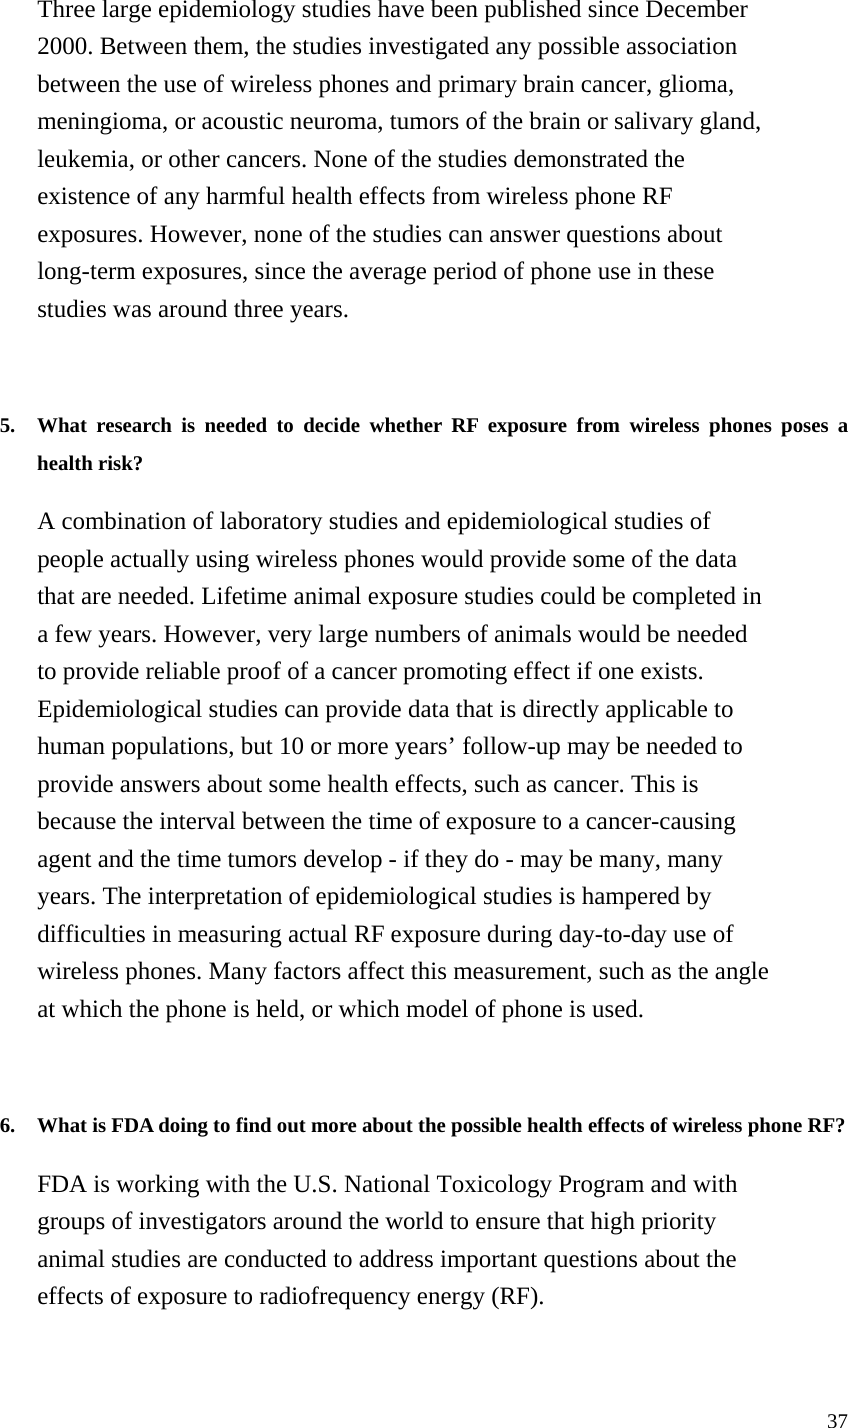 Three large epidemiology studies have been published since December 2000. Between them, the studies investigated any possible association between the use of wireless phones and primary brain cancer, glioma, meningioma, or acoustic neuroma, tumors of the brain or salivary gland, leukemia, or other cancers. None of the studies demonstrated the existence of any harmful health effects from wireless phone RF exposures. However, none of the studies can answer questions about long-term exposures, since the average period of phone use in these studies was around three years.   5.  What research is needed to decide whether RF exposure from wireless phones poses a health risk?   A combination of laboratory studies and epidemiological studies of people actually using wireless phones would provide some of the data that are needed. Lifetime animal exposure studies could be completed in a few years. However, very large numbers of animals would be needed to provide reliable proof of a cancer promoting effect if one exists. Epidemiological studies can provide data that is directly applicable to human populations, but 10 or more years’ follow-up may be needed to provide answers about some health effects, such as cancer. This is because the interval between the time of exposure to a cancer-causing agent and the time tumors develop - if they do - may be many, many years. The interpretation of epidemiological studies is hampered by difficulties in measuring actual RF exposure during day-to-day use of wireless phones. Many factors affect this measurement, such as the angle at which the phone is held, or which model of phone is used.   6.  What is FDA doing to find out more about the possible health effects of wireless phone RF?   FDA is working with the U.S. National Toxicology Program and with groups of investigators around the world to ensure that high priority animal studies are conducted to address important questions about the effects of exposure to radiofrequency energy (RF). 37 